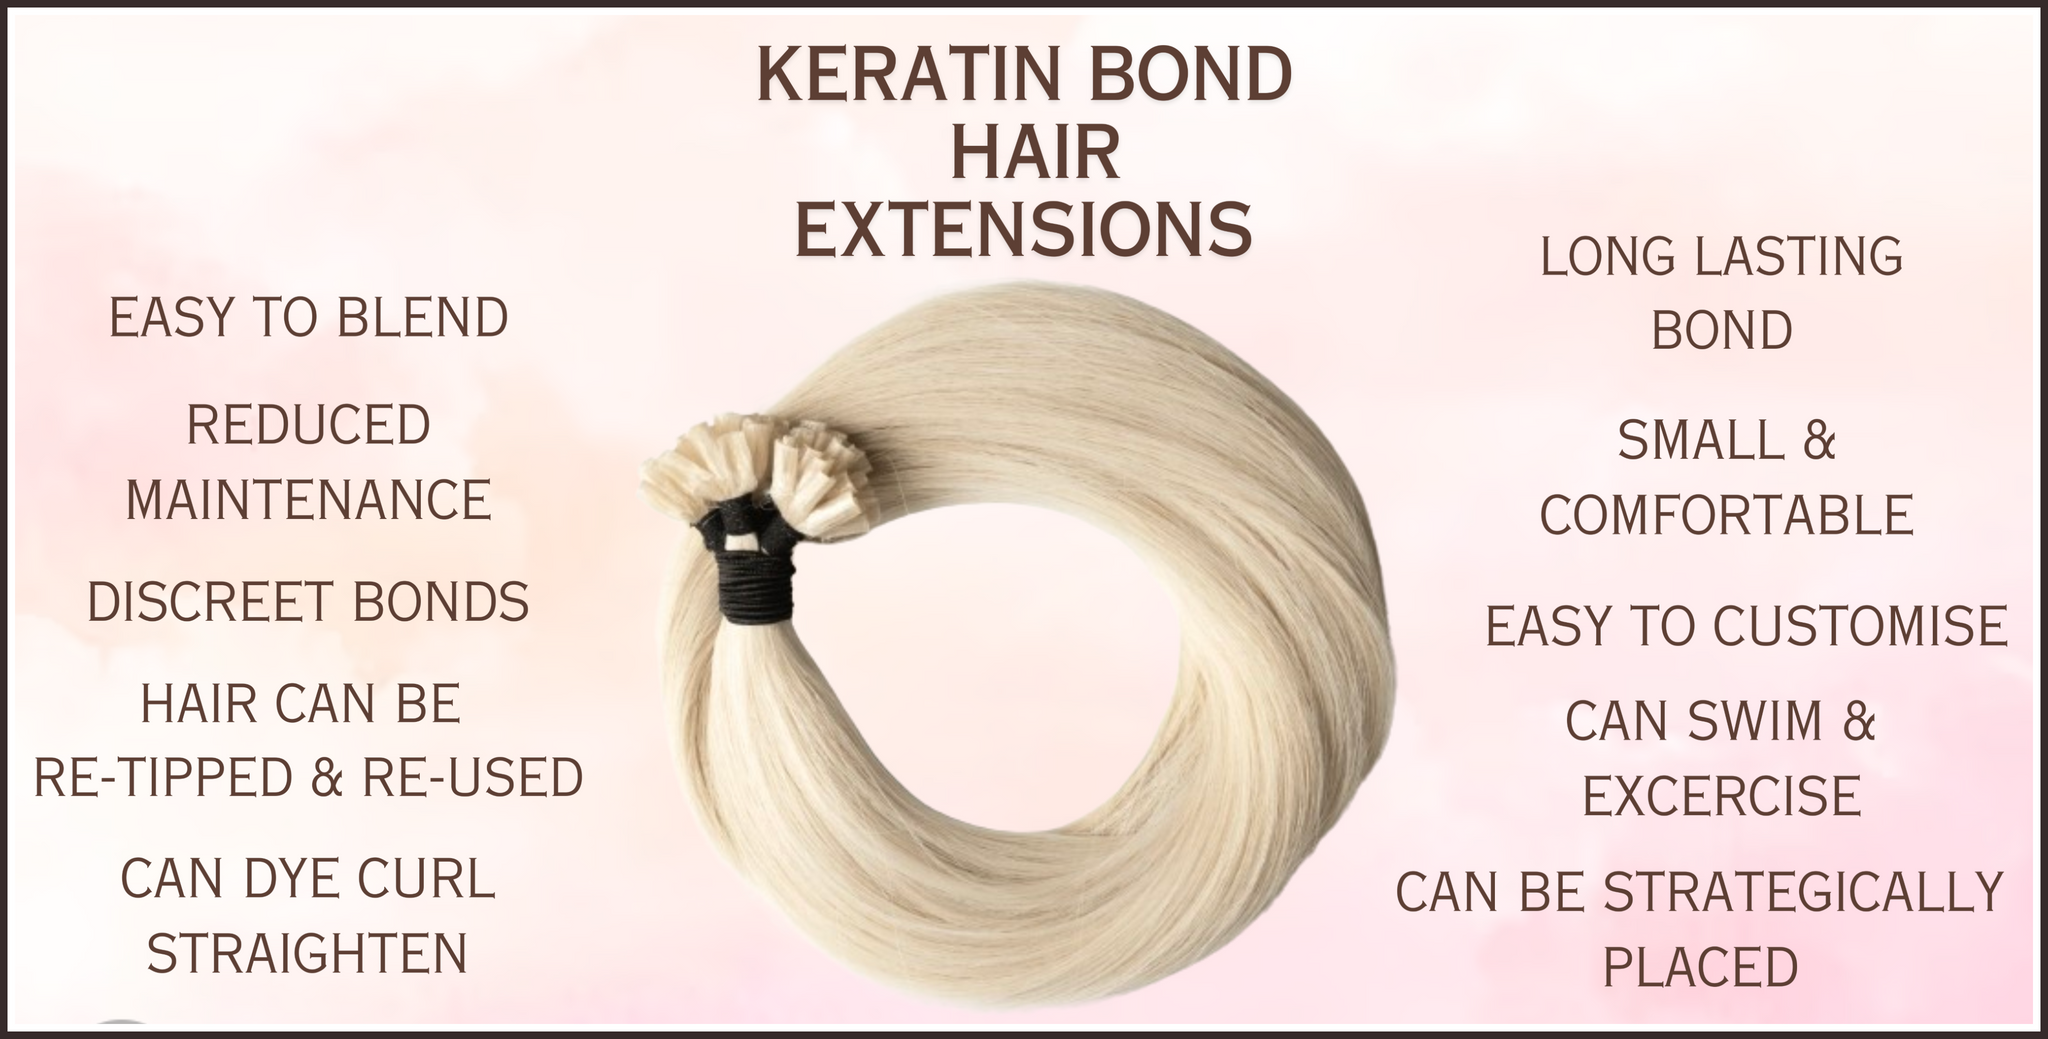 What are the benefits of keratin bond hair extensions